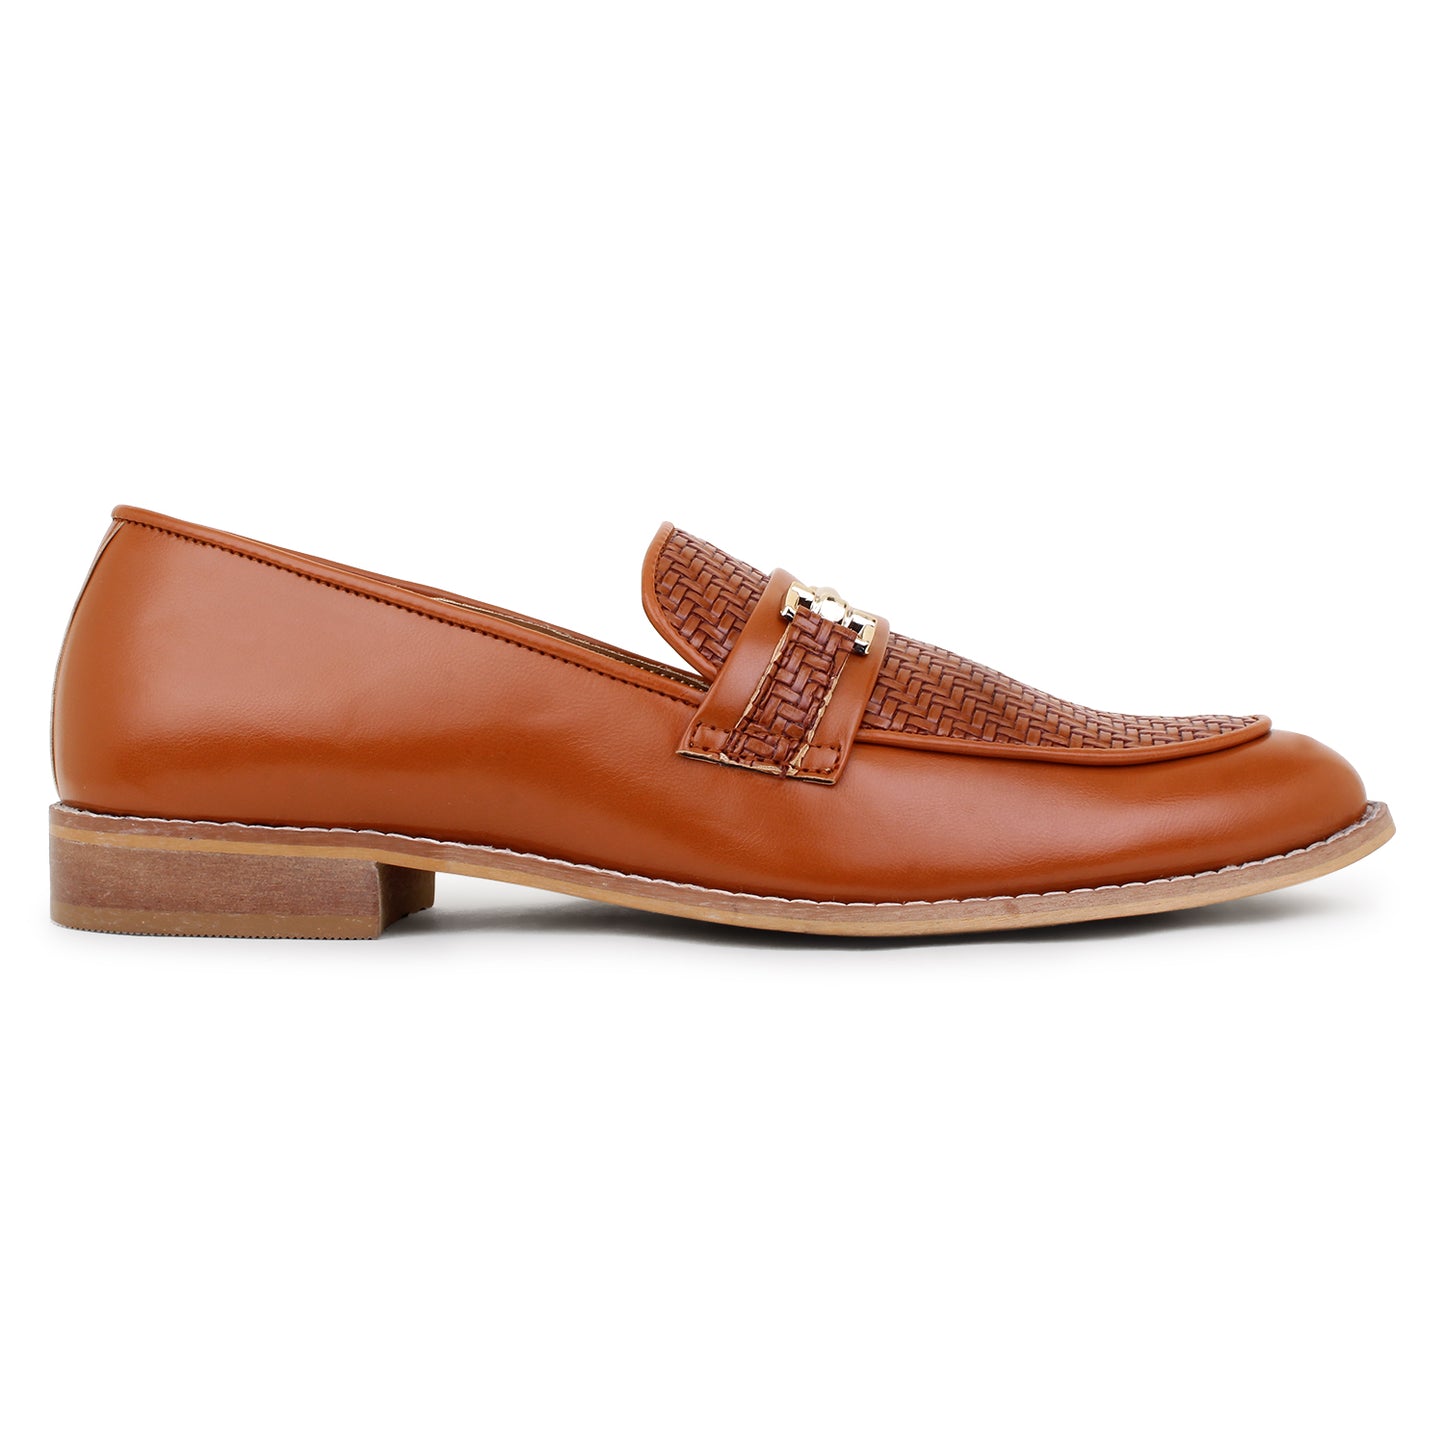 Woven Leather Slip Ons with Saddle - Tan